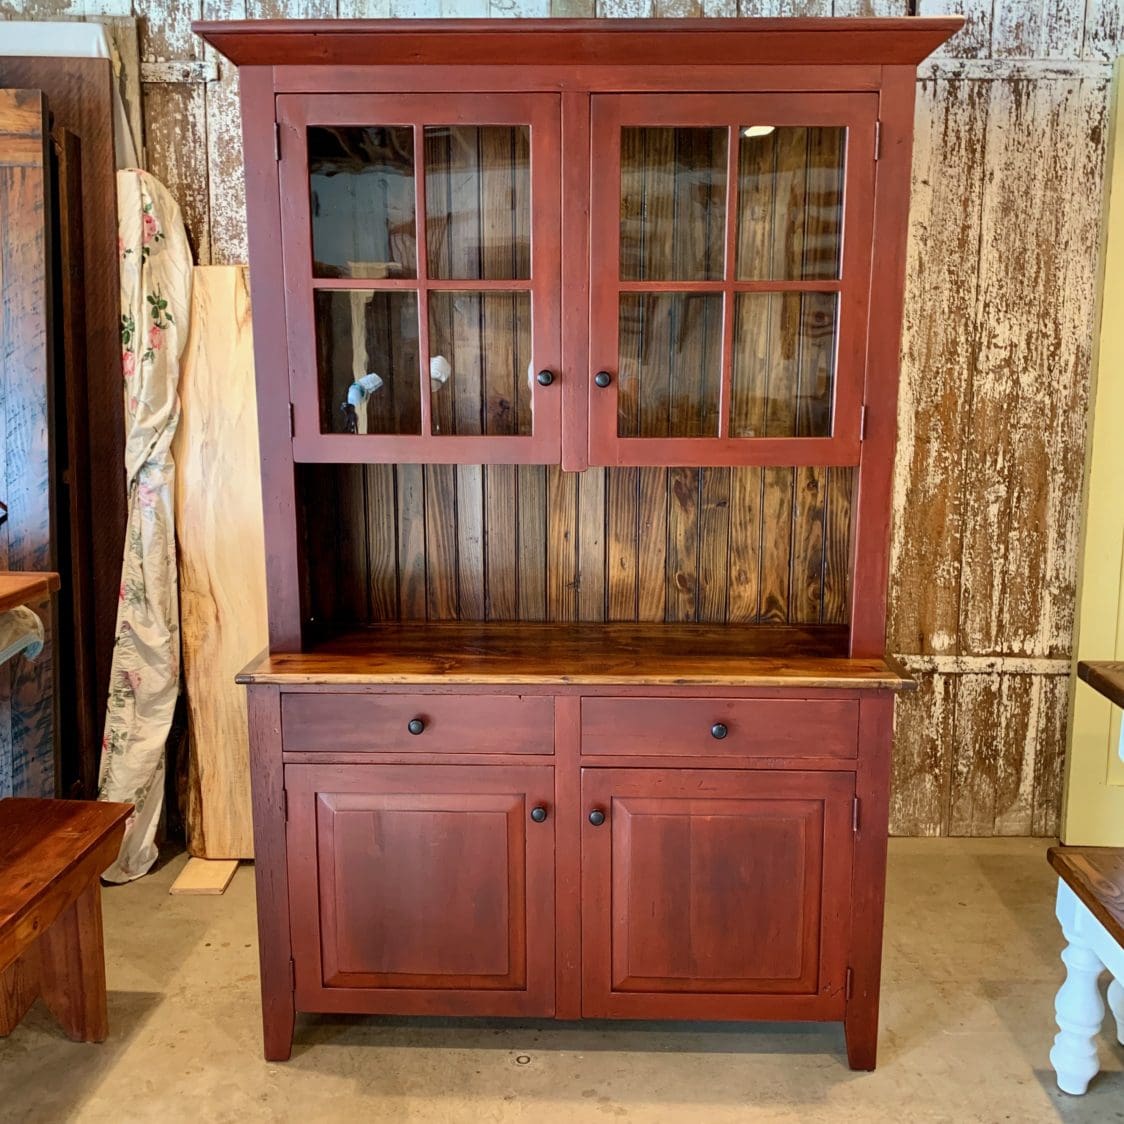 Country hutch will add charm to your dining room